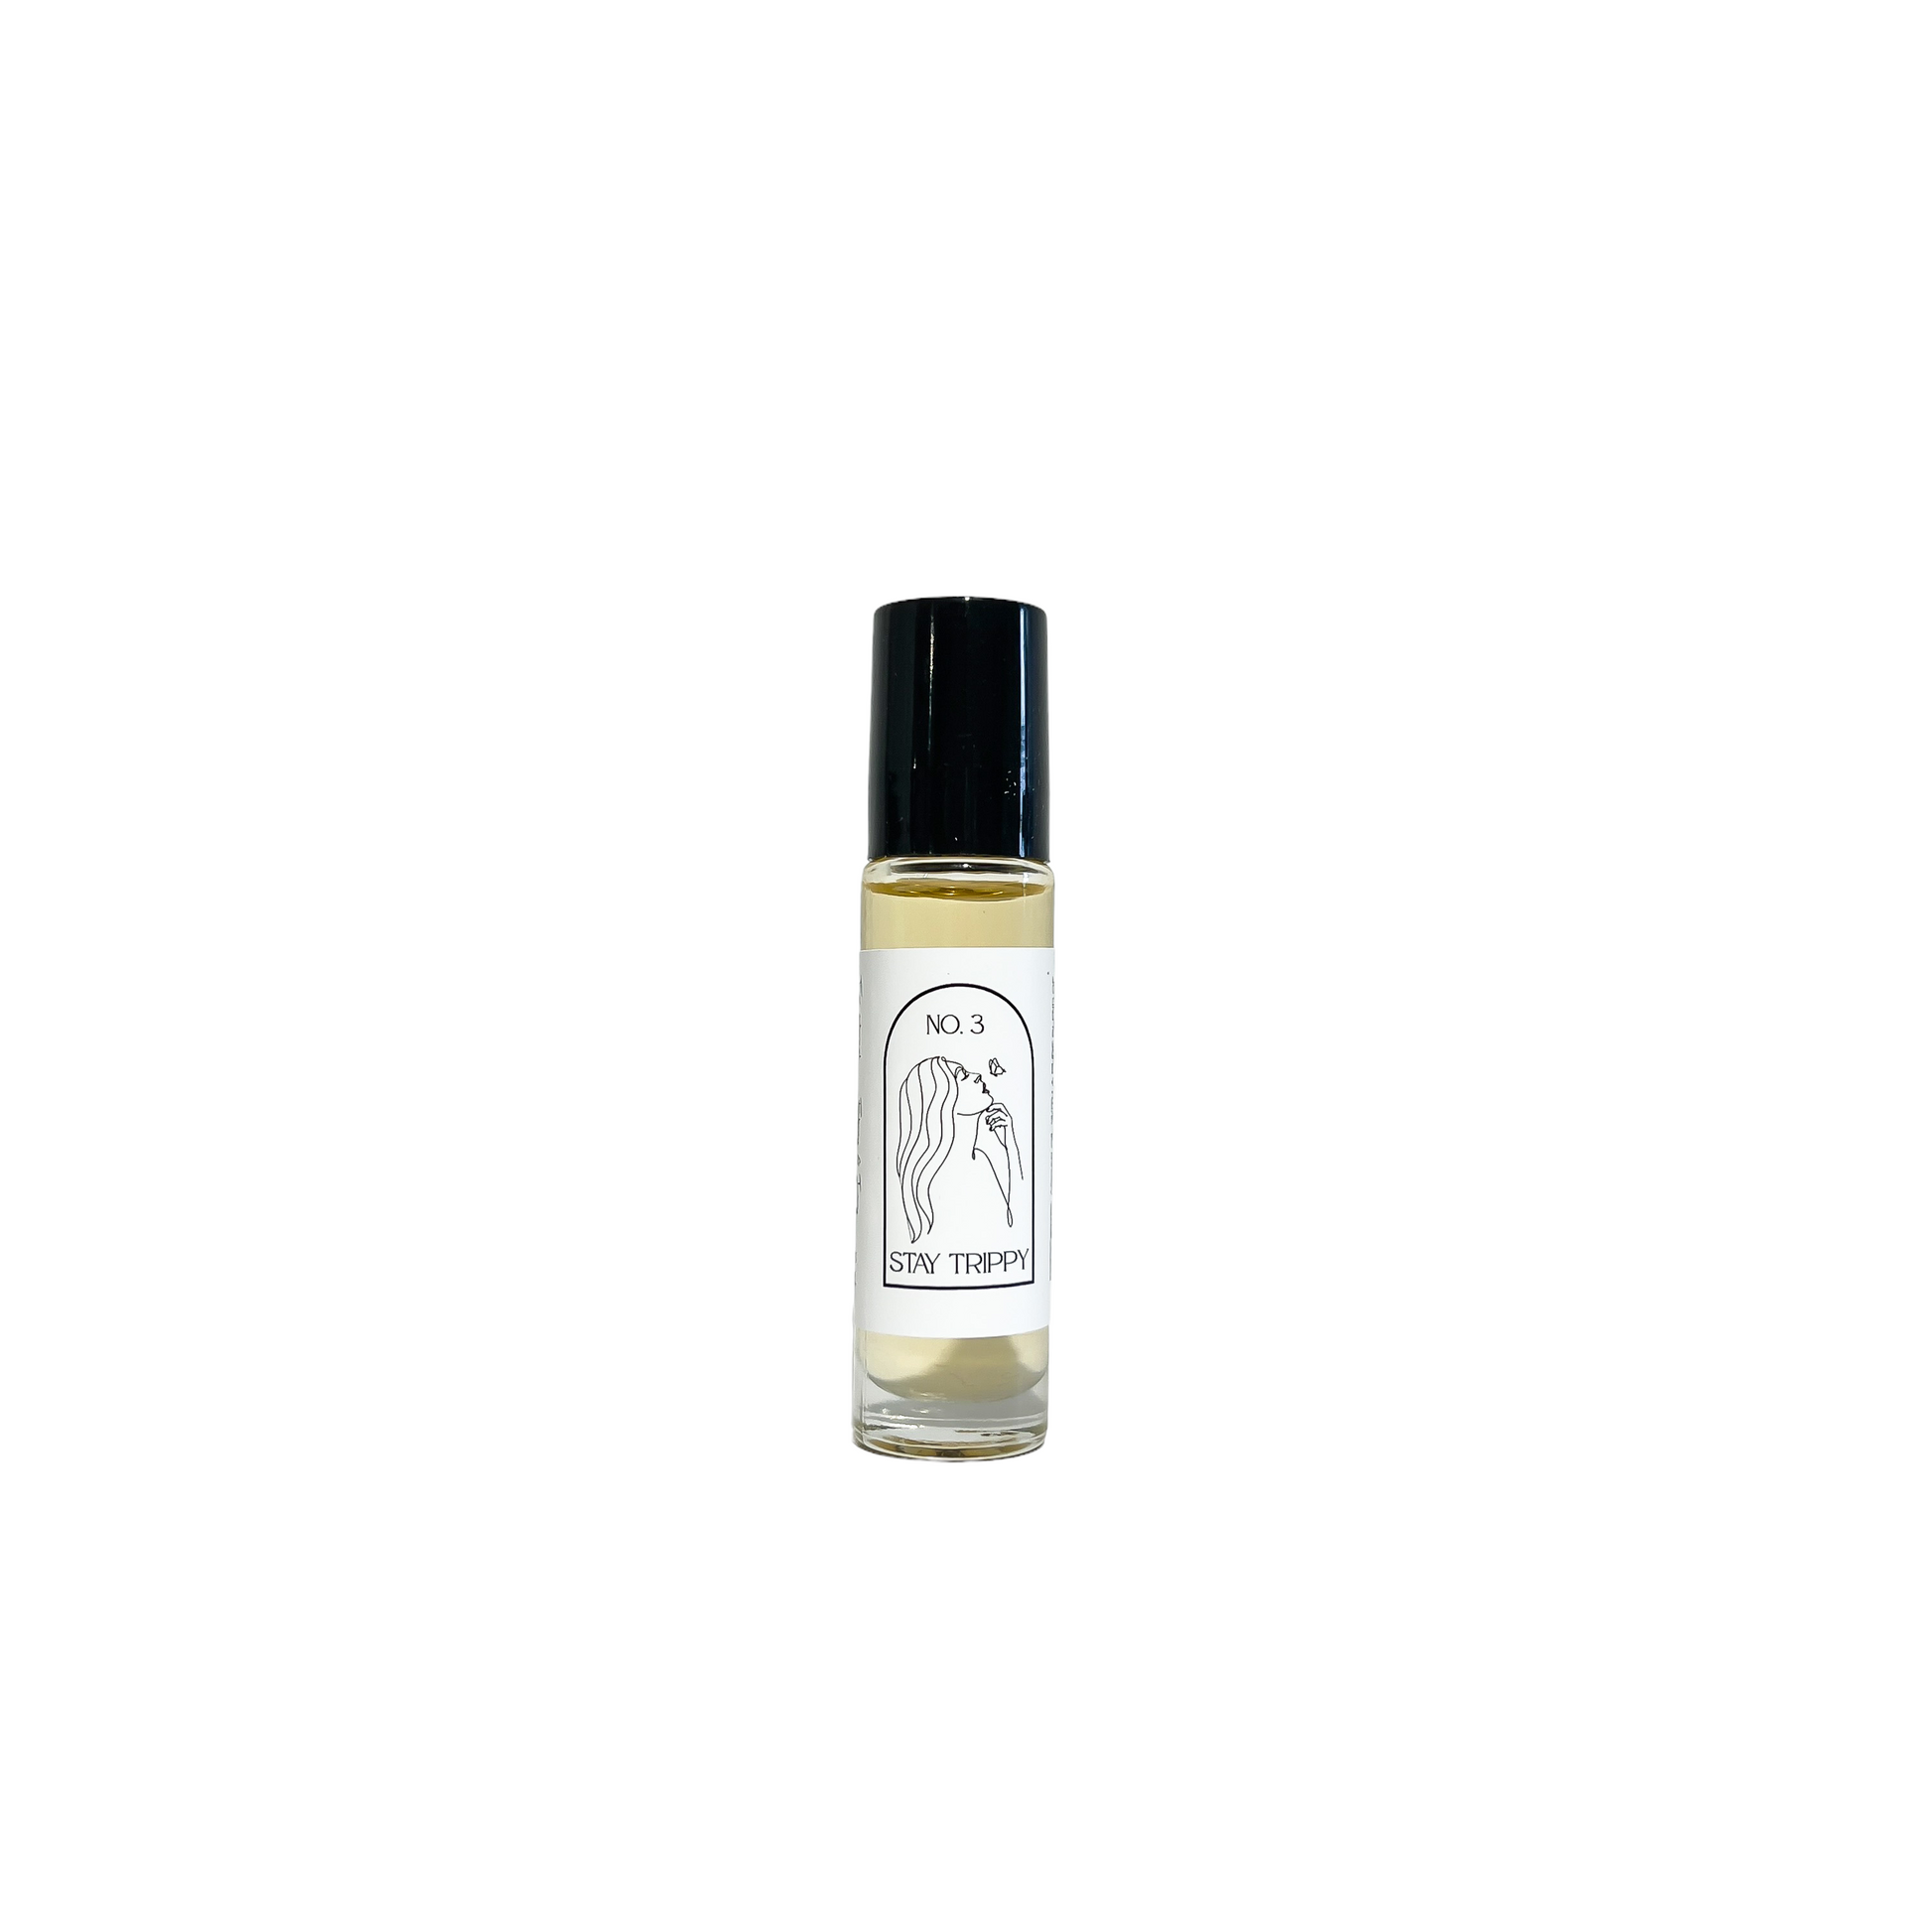 Clear glass, ten milliliter, Sandalwood, Patchouli, and coconut scented roll-on applicator with a black lid and a white label that reads Stay Trippy